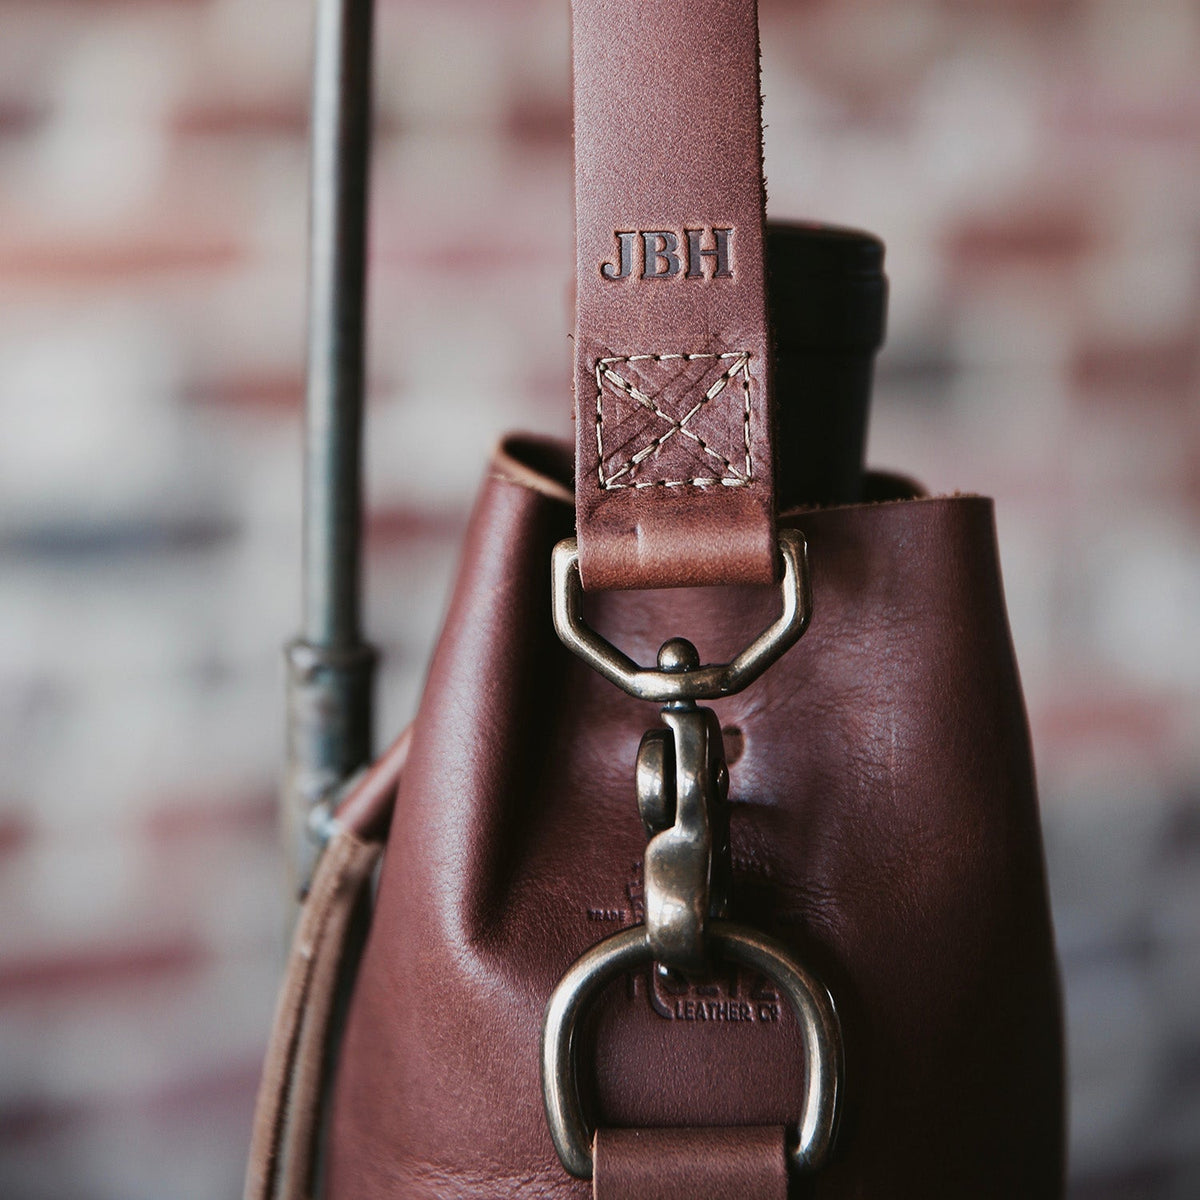 Easy Way to Protect Leather Handbags from Strap Indentations